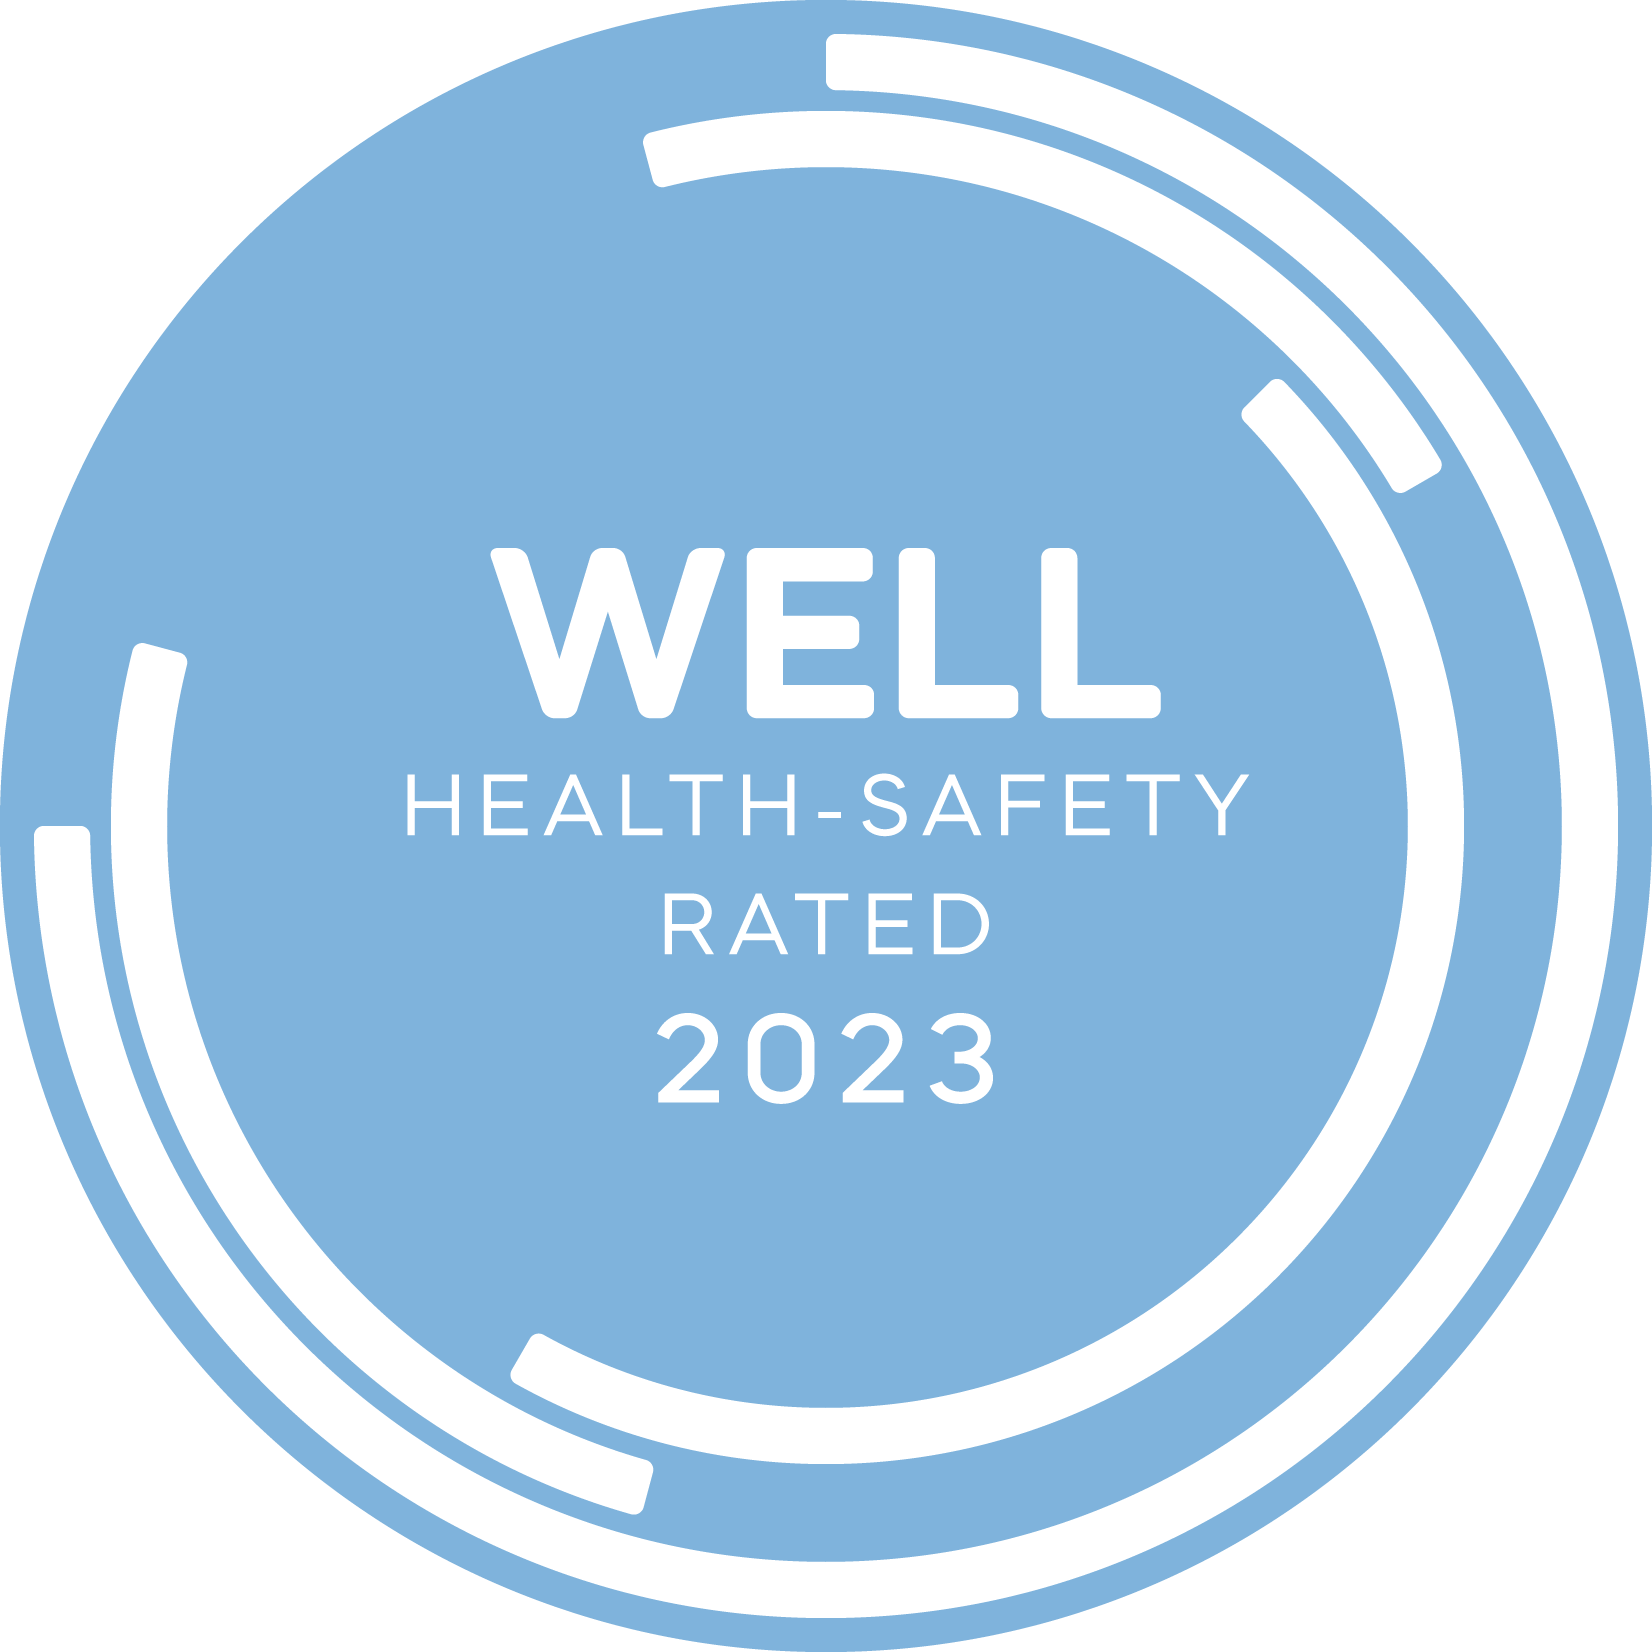 2023 WELL Health-Safety rated